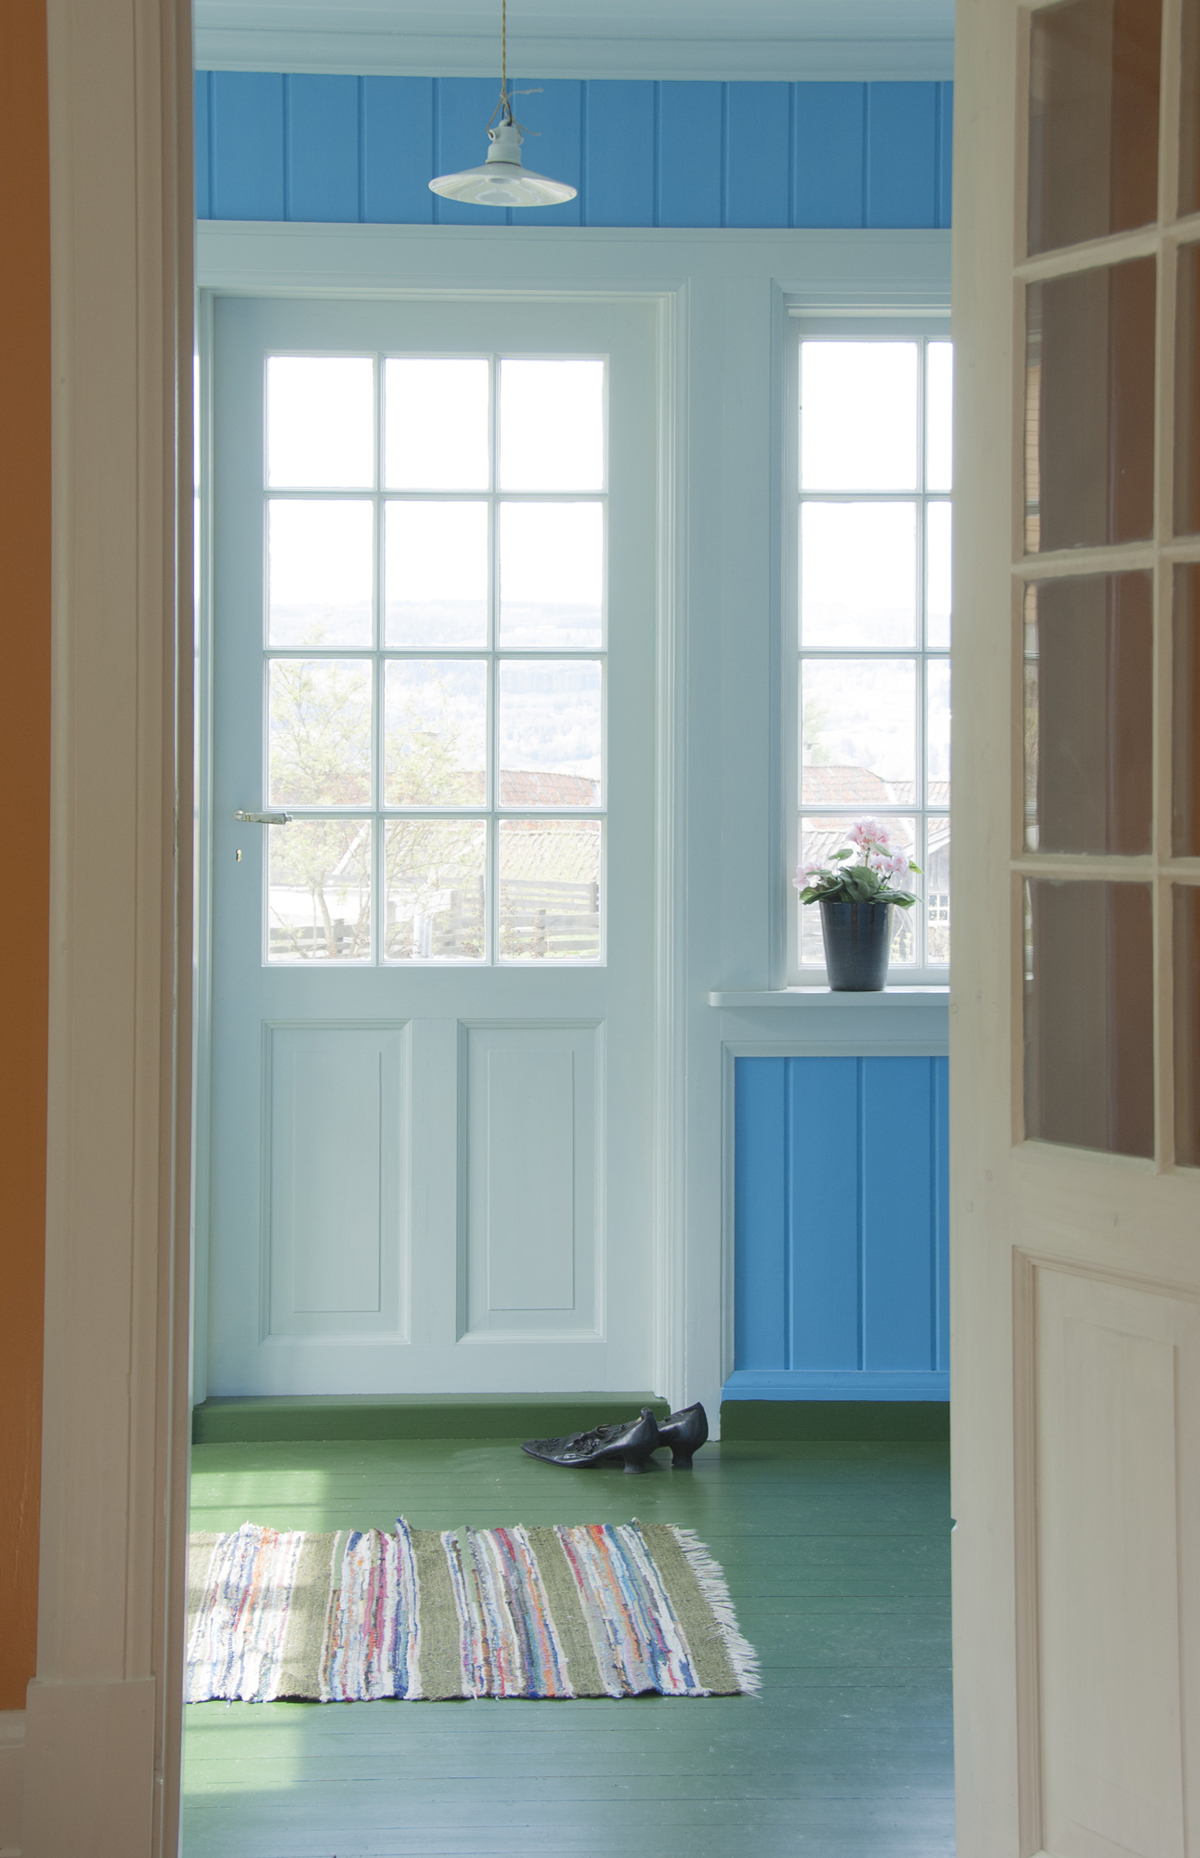 The house from the 1920s is colourful and beautiful inside.&nbsp;Photo: Camilla Damg&aring;rd/Maihaugen.&nbsp;

